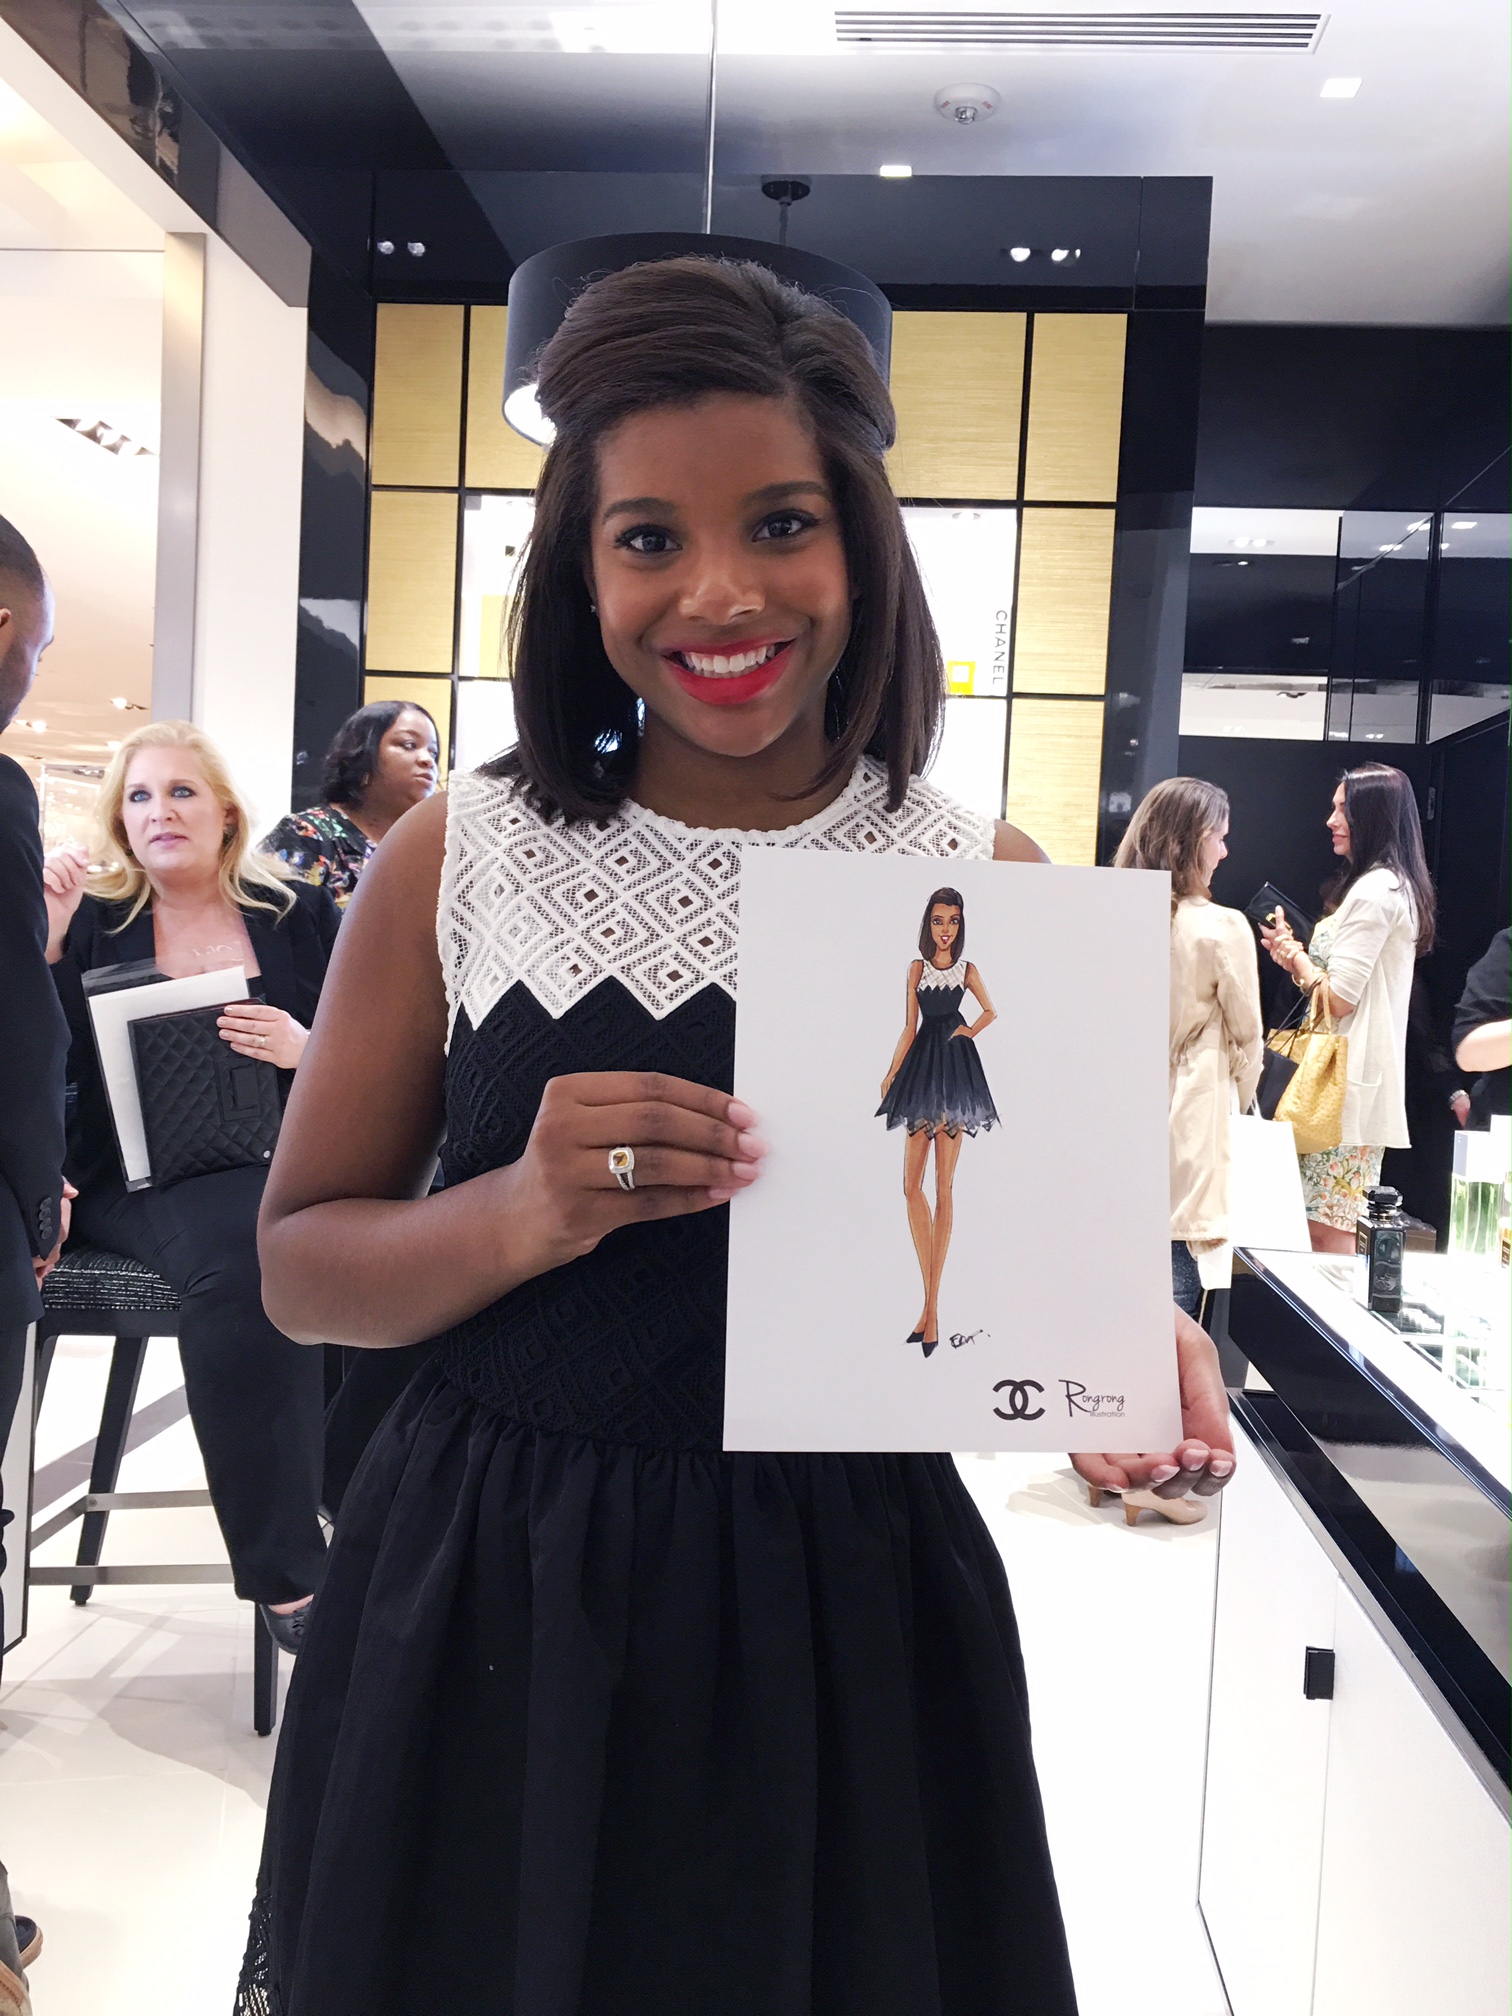 Live sketch event for Chanel at Saks Fifth Avenue opening in